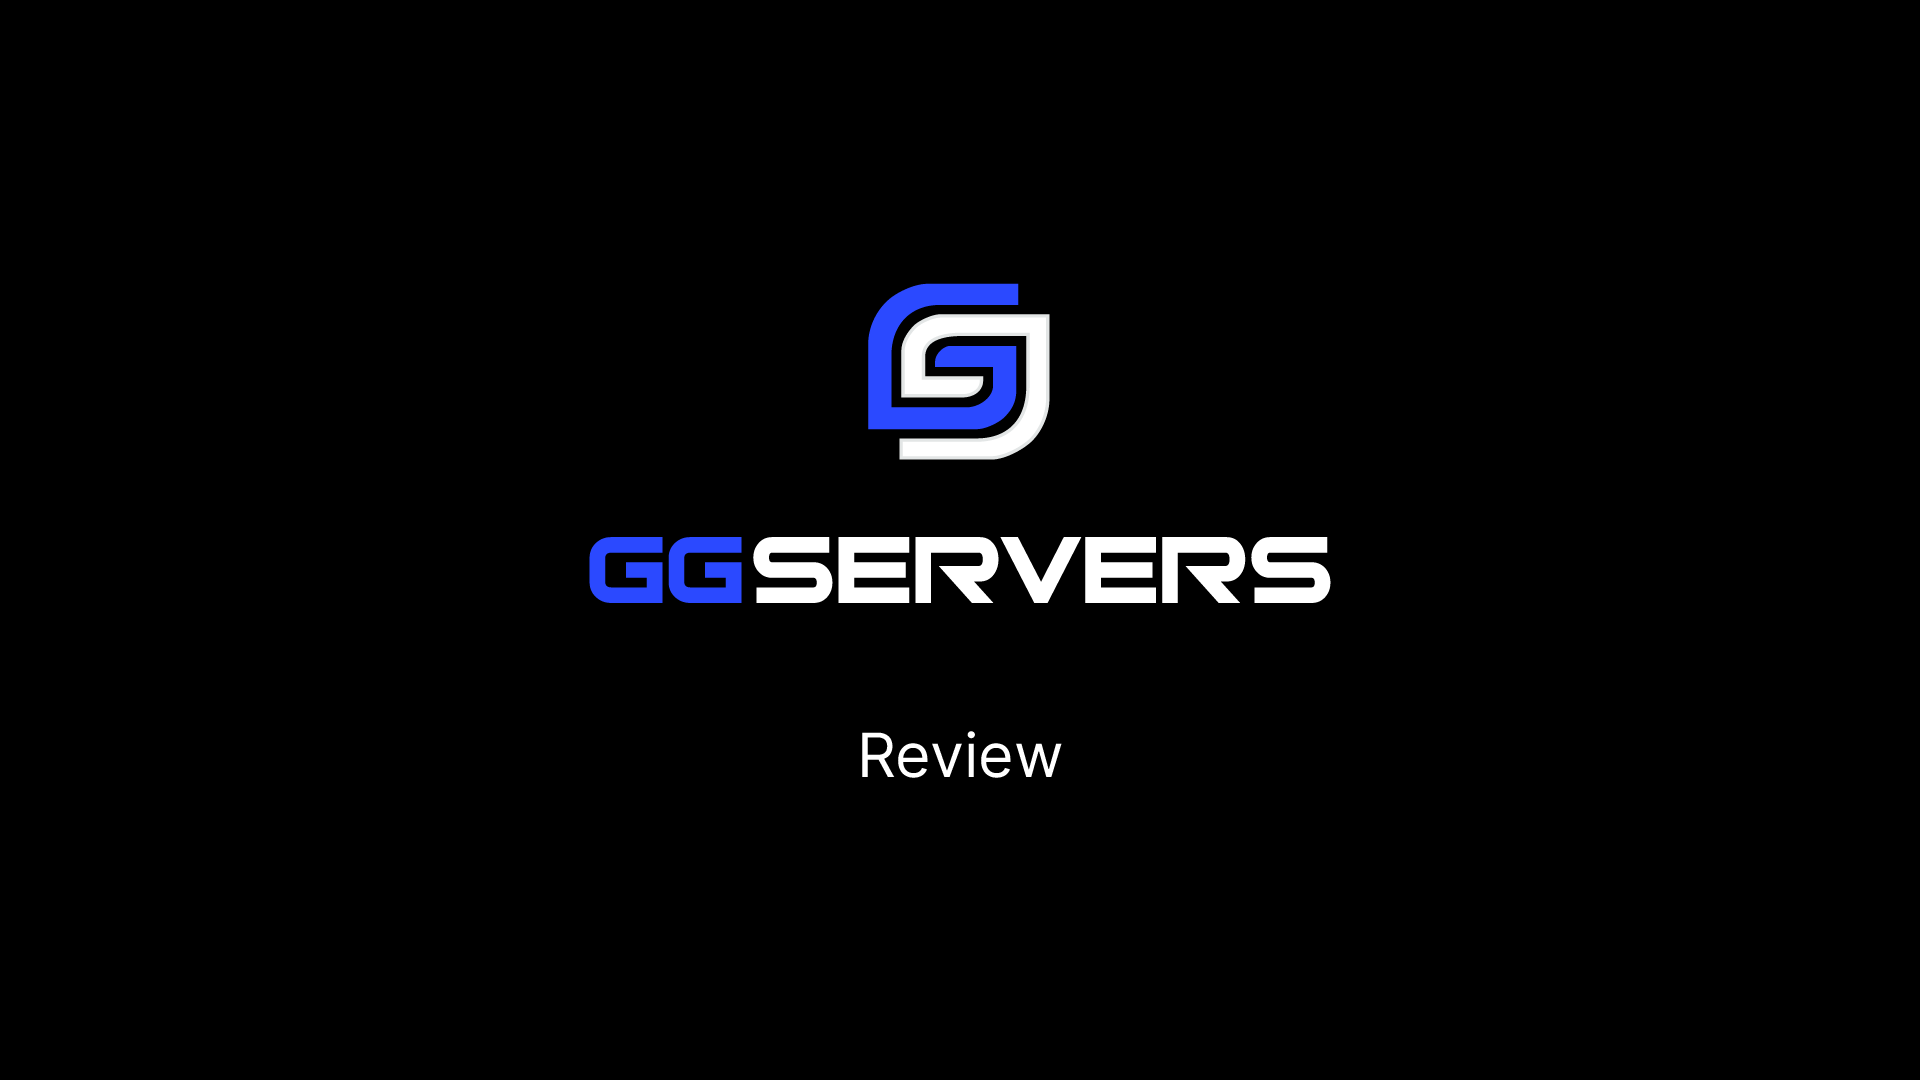 GG servers review featured image